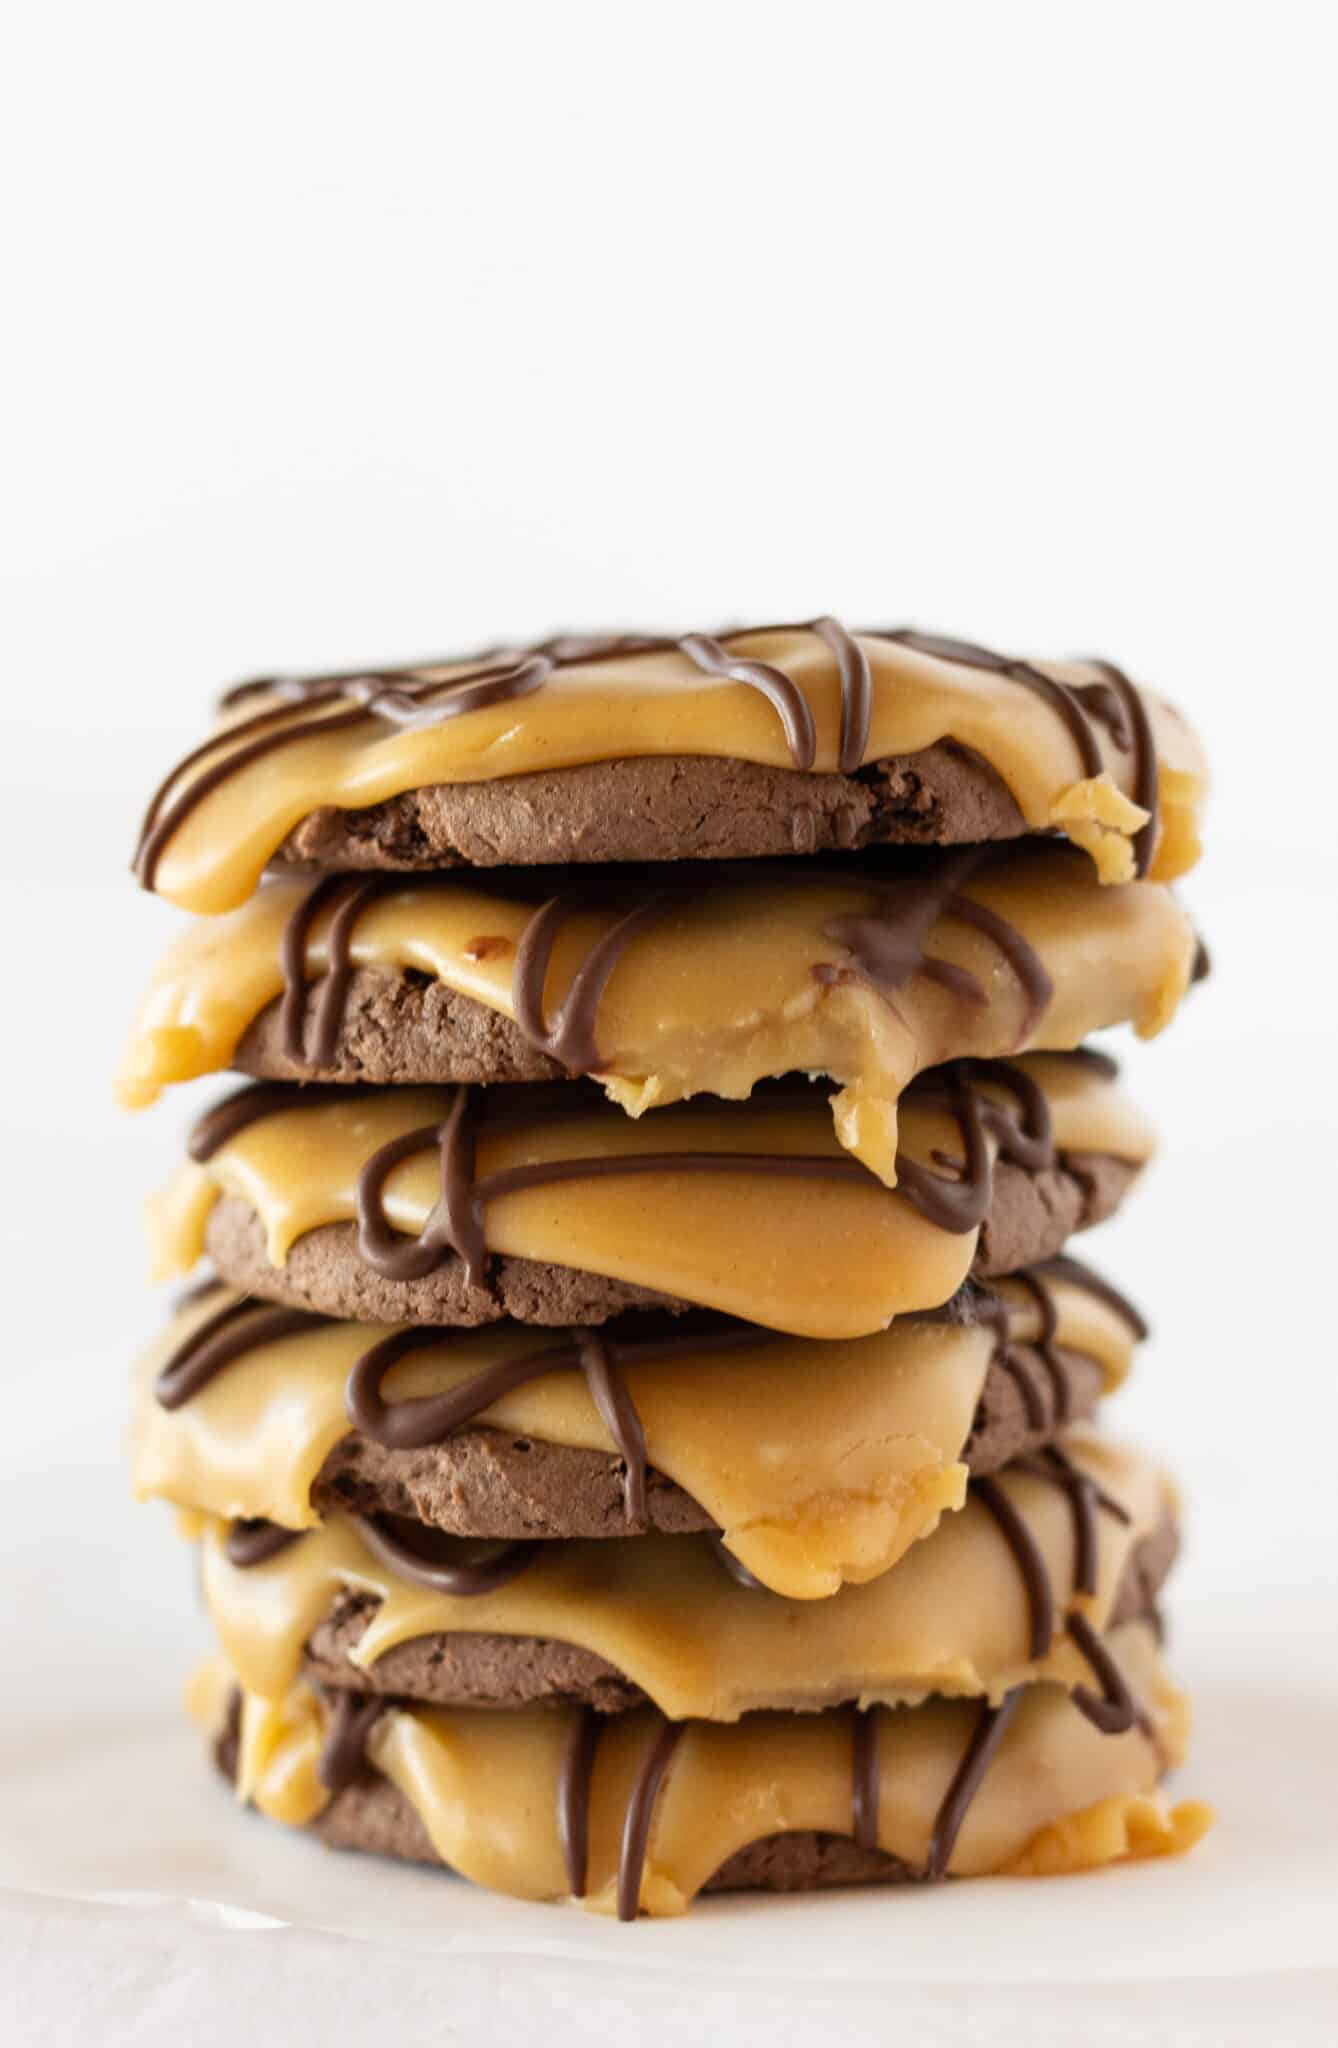 Easy Chocolate Peanut Butter Texas Sheet Cake Cookies with a cake mix, a recipe featured by top US cookies blogger, Practically Homemade